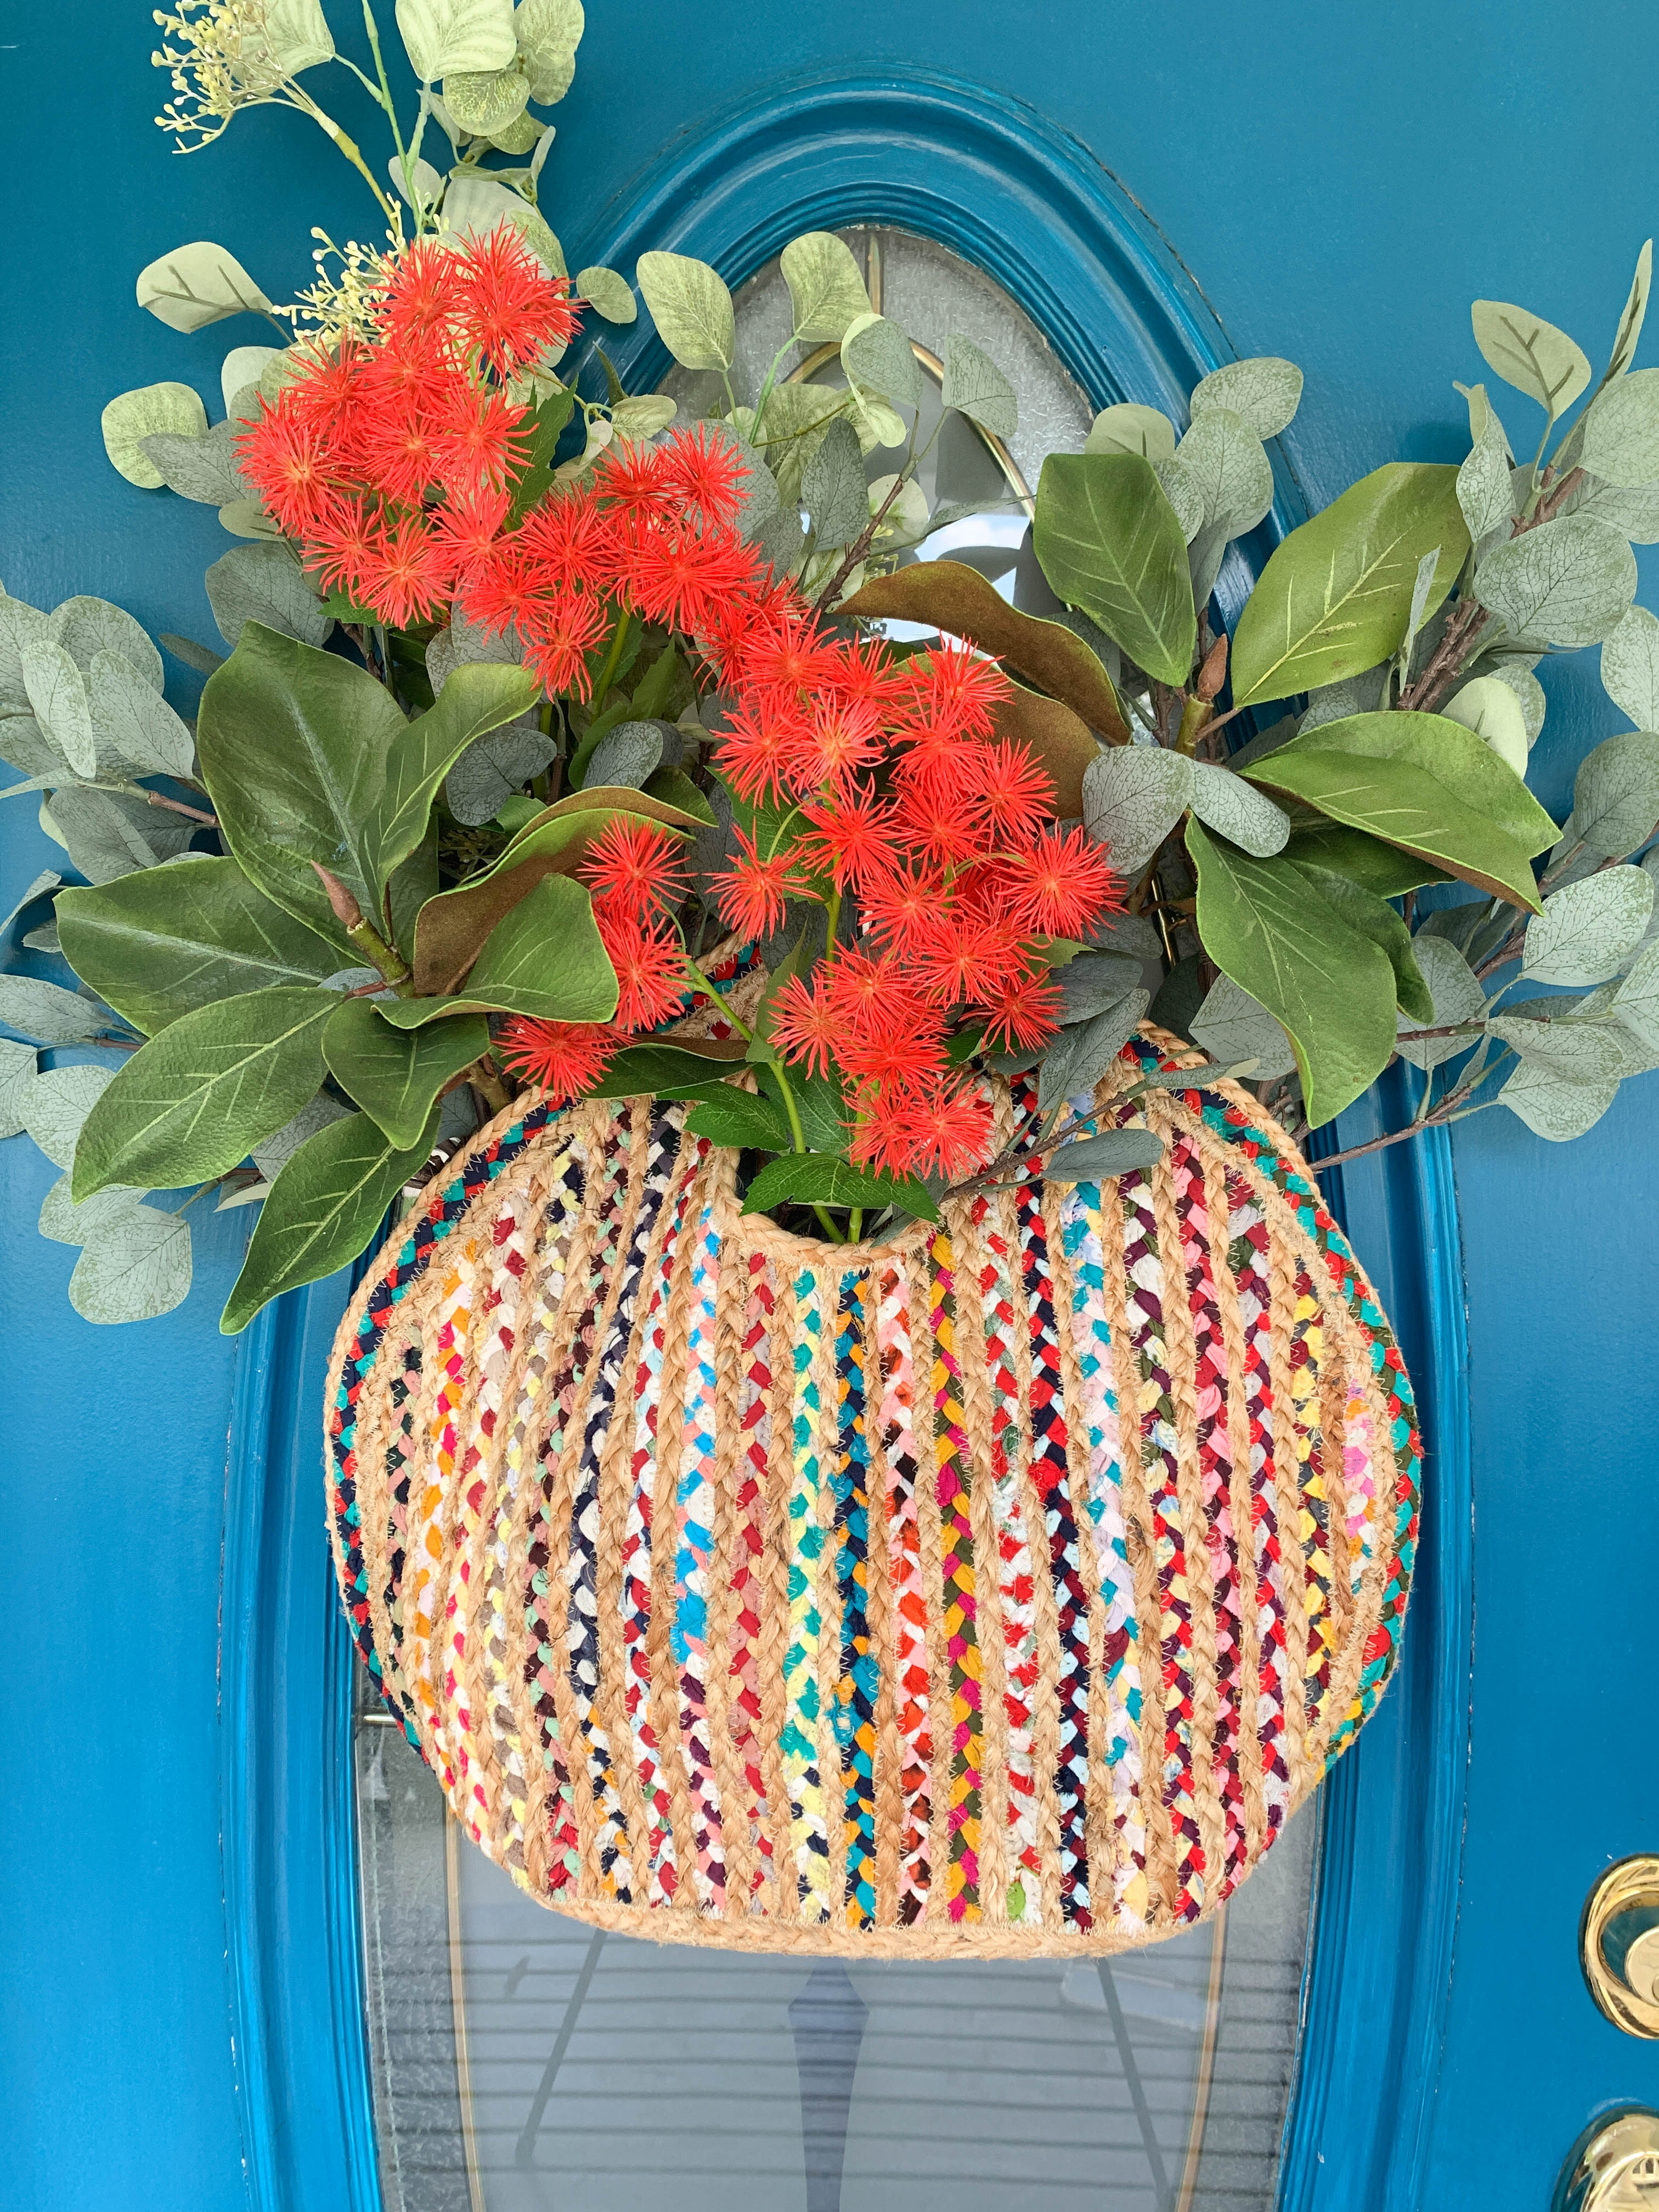 A vibrant orange-red flower tucked in amidst faux greenery in a natural weave handbag hanging on an entrance door.